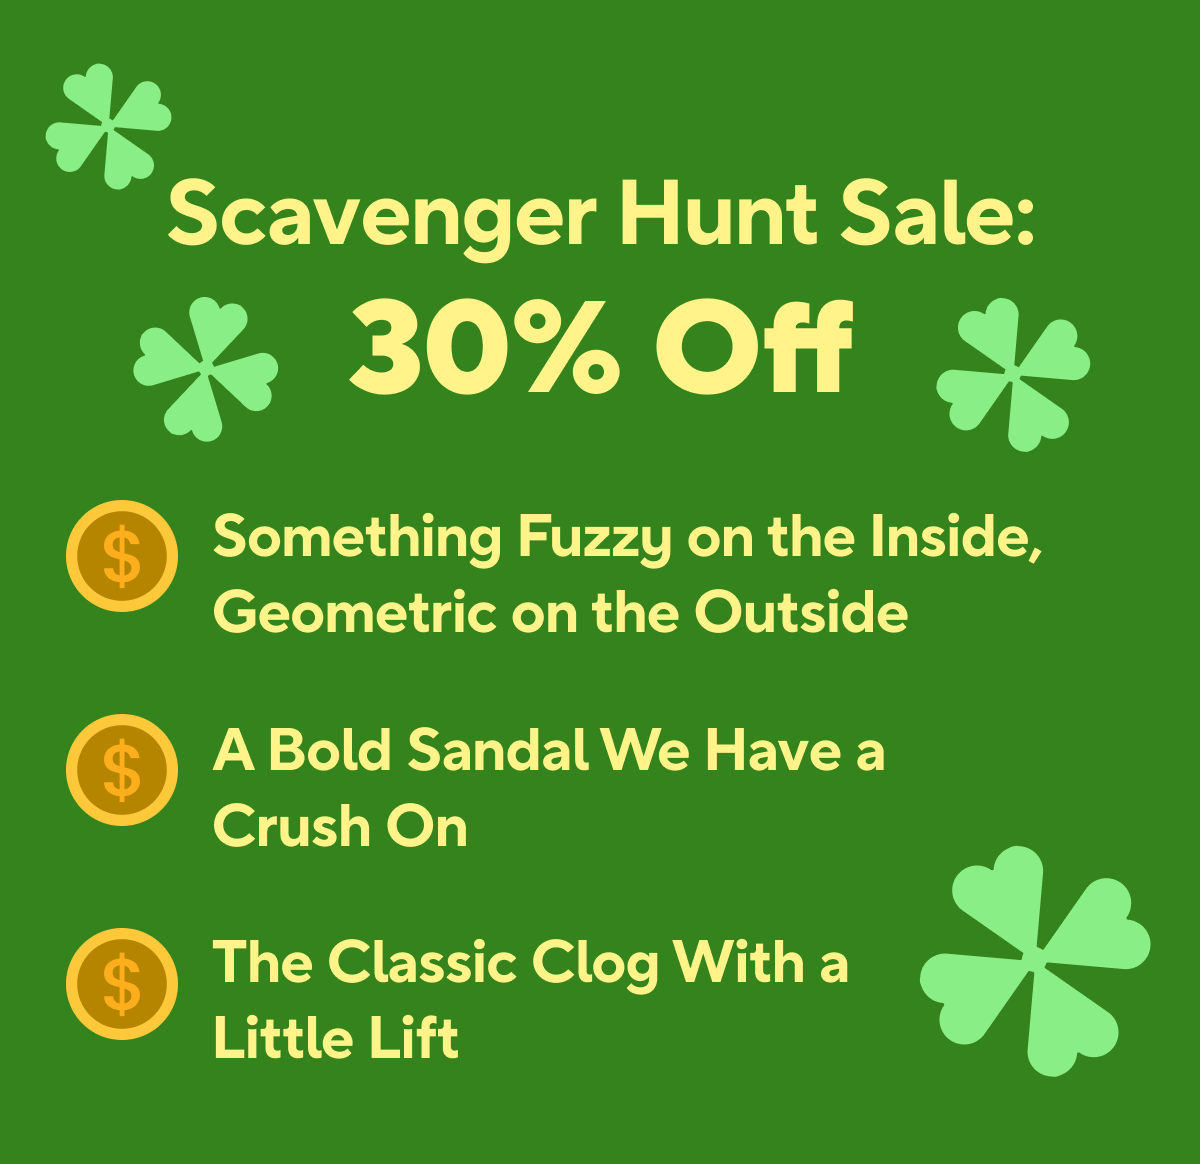 Crocs Scavenger Hunt! Find The Styles That Are 30% Off!